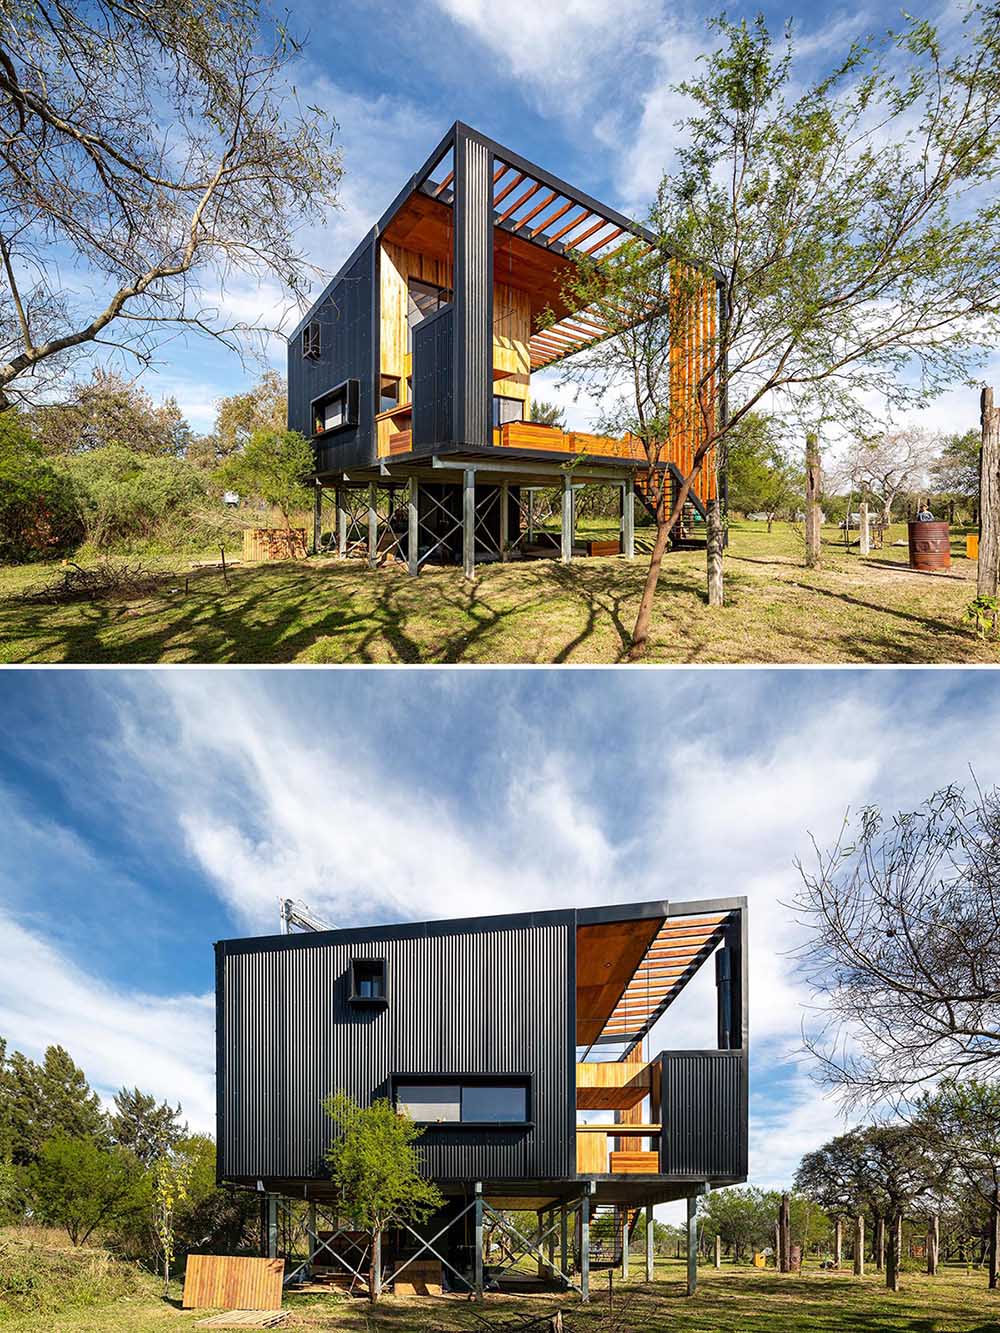 A small and modern house with a built-in skateboard ramp, wood exterior cladding, and black metal.